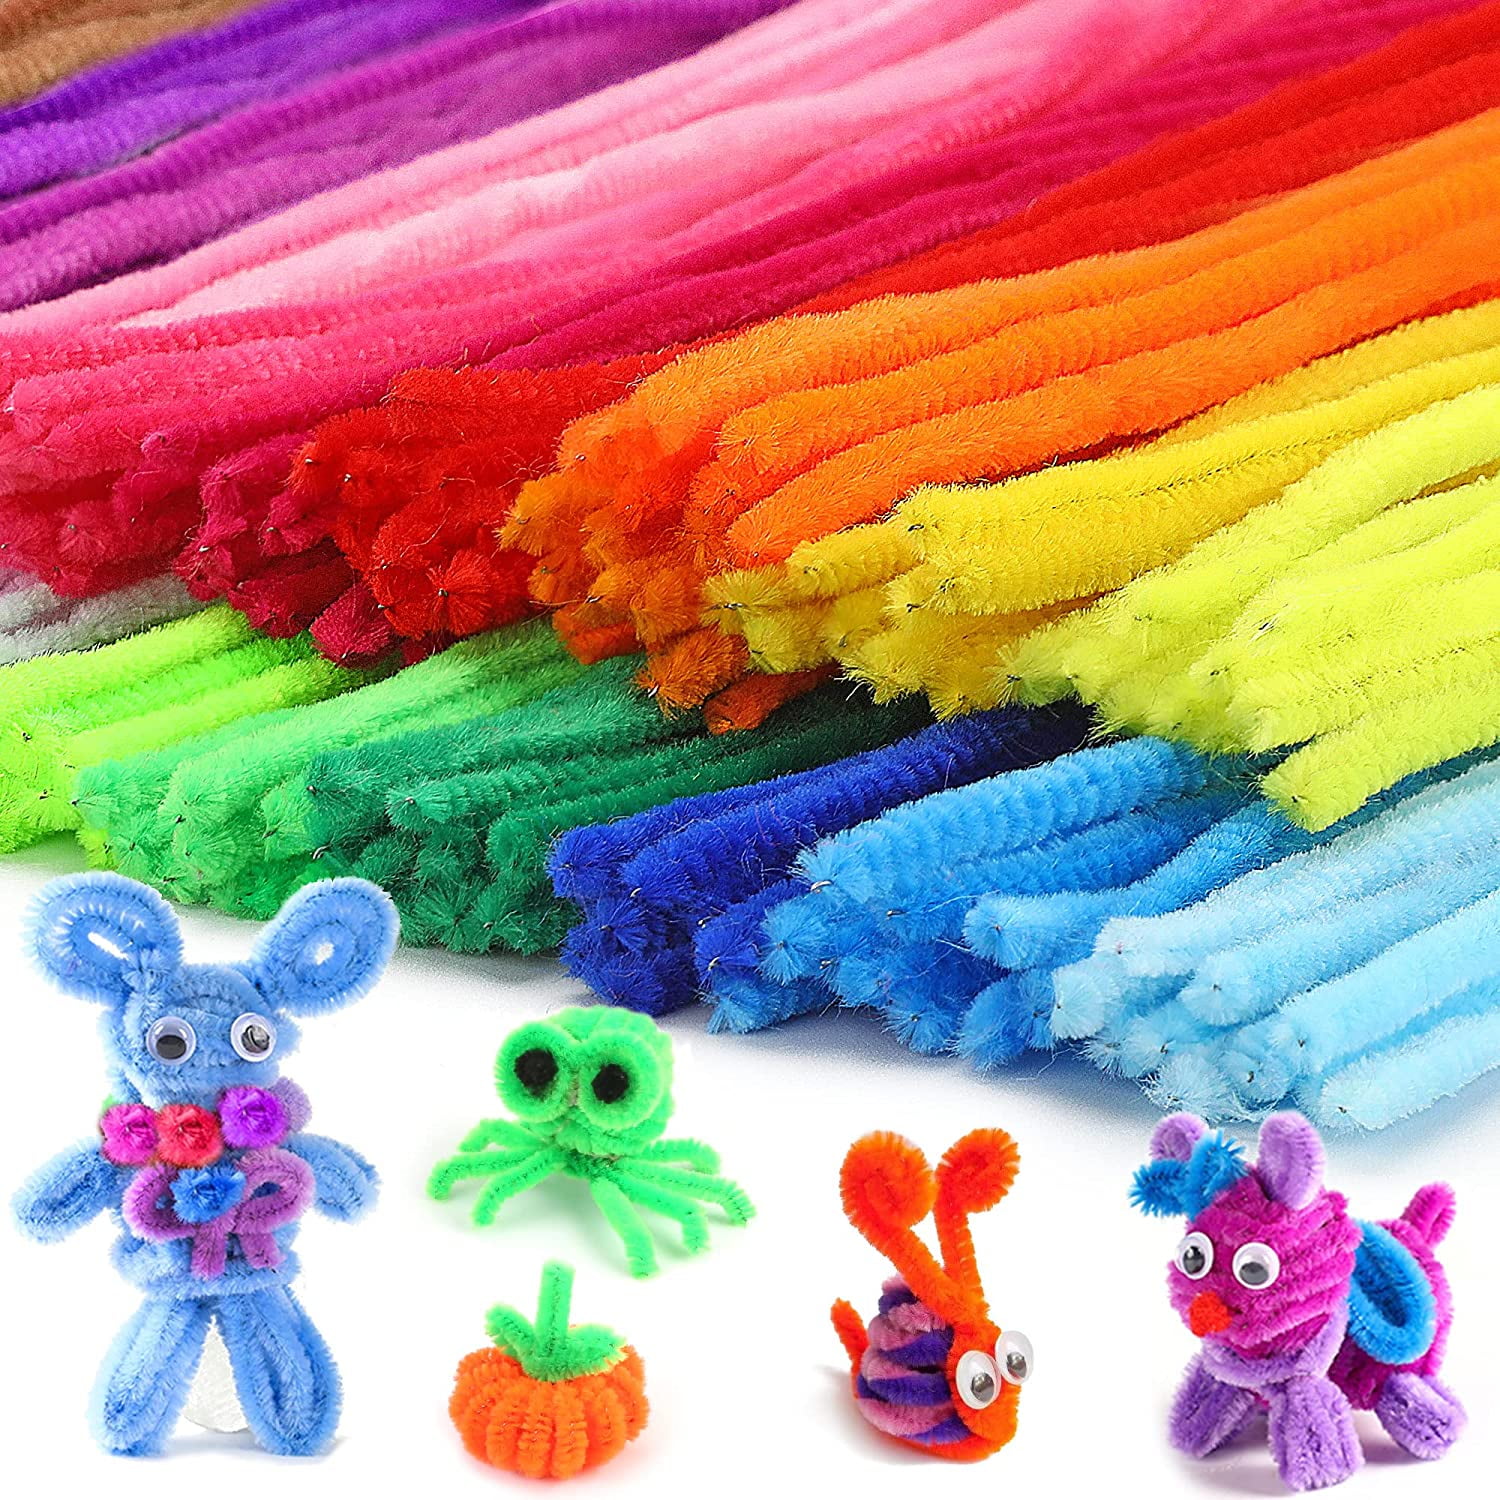 READY 2 LEARN Chenille Stems - Set of 324 - 10 Colors - Soft Pipe Cleaners  - Art Supplies for DIY Crafts - 12 in. long